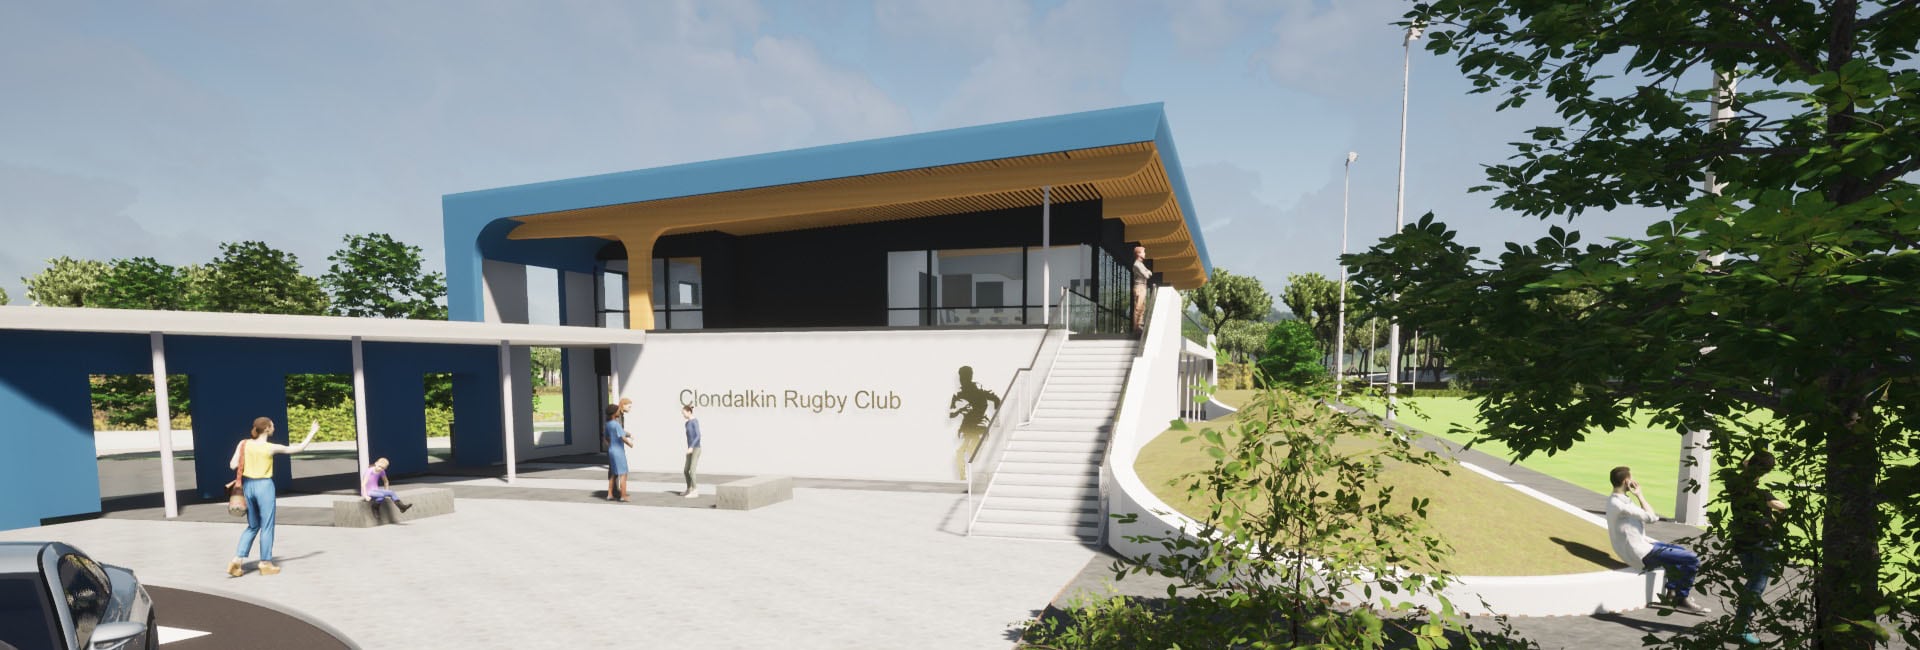 Clondalkin-Rugby-Club-featured